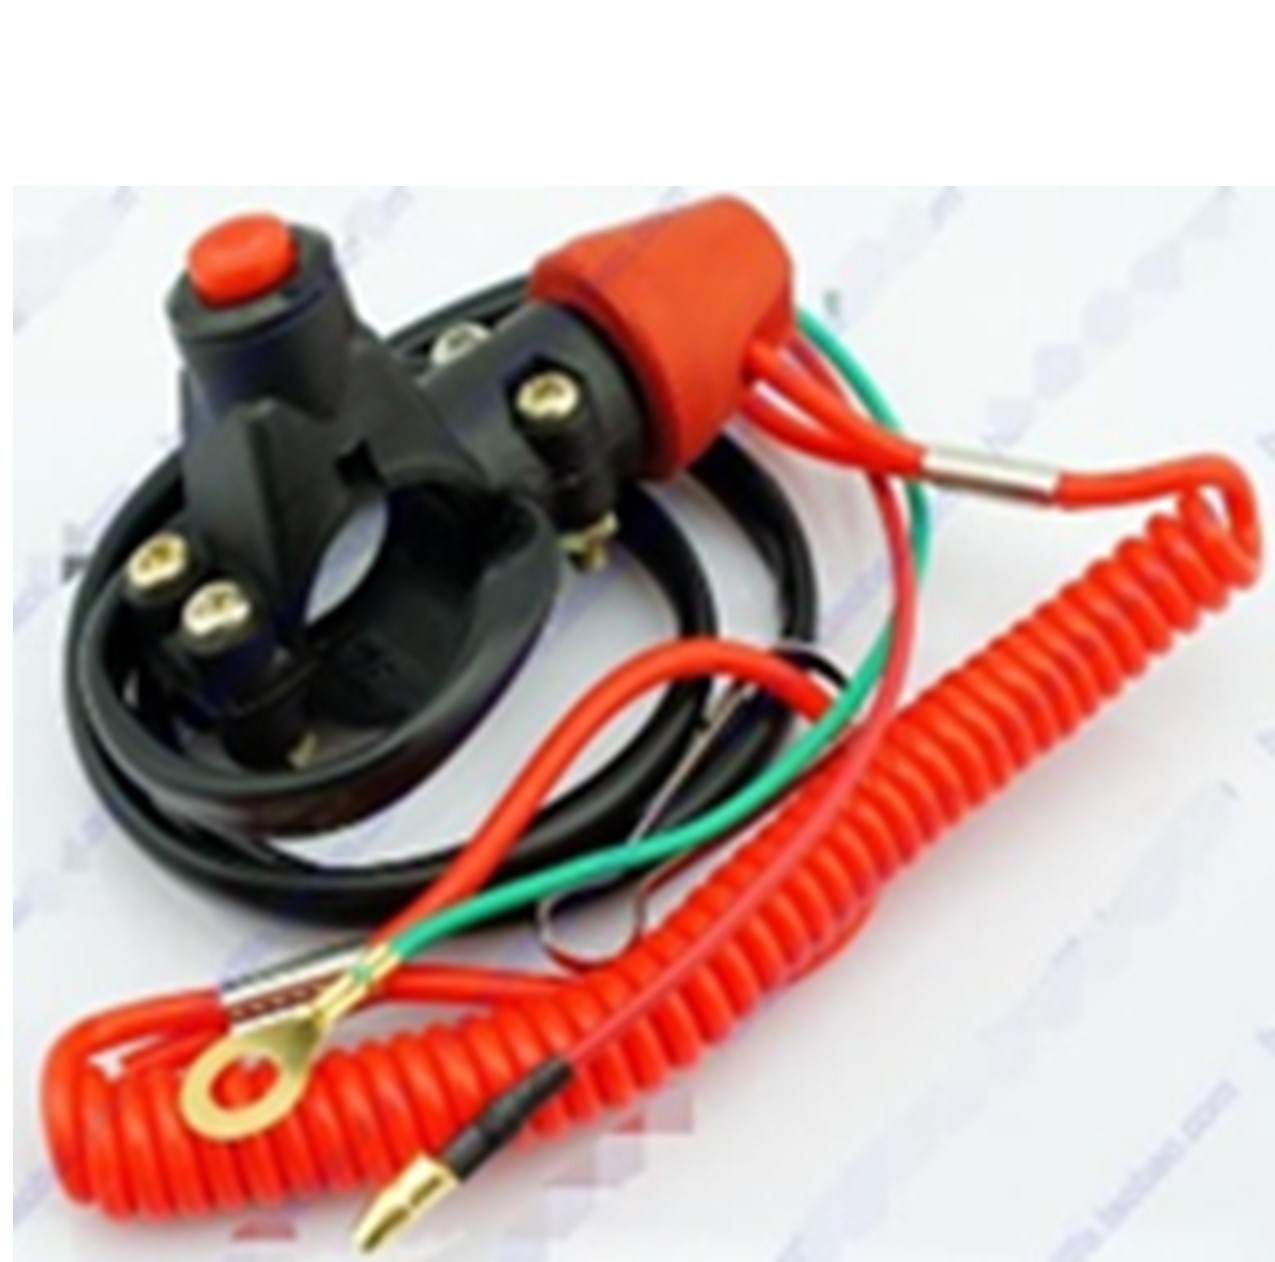 Universal Safety Tether Switch - Used on Many ATVs-GoKarts-Dirt Bikes.